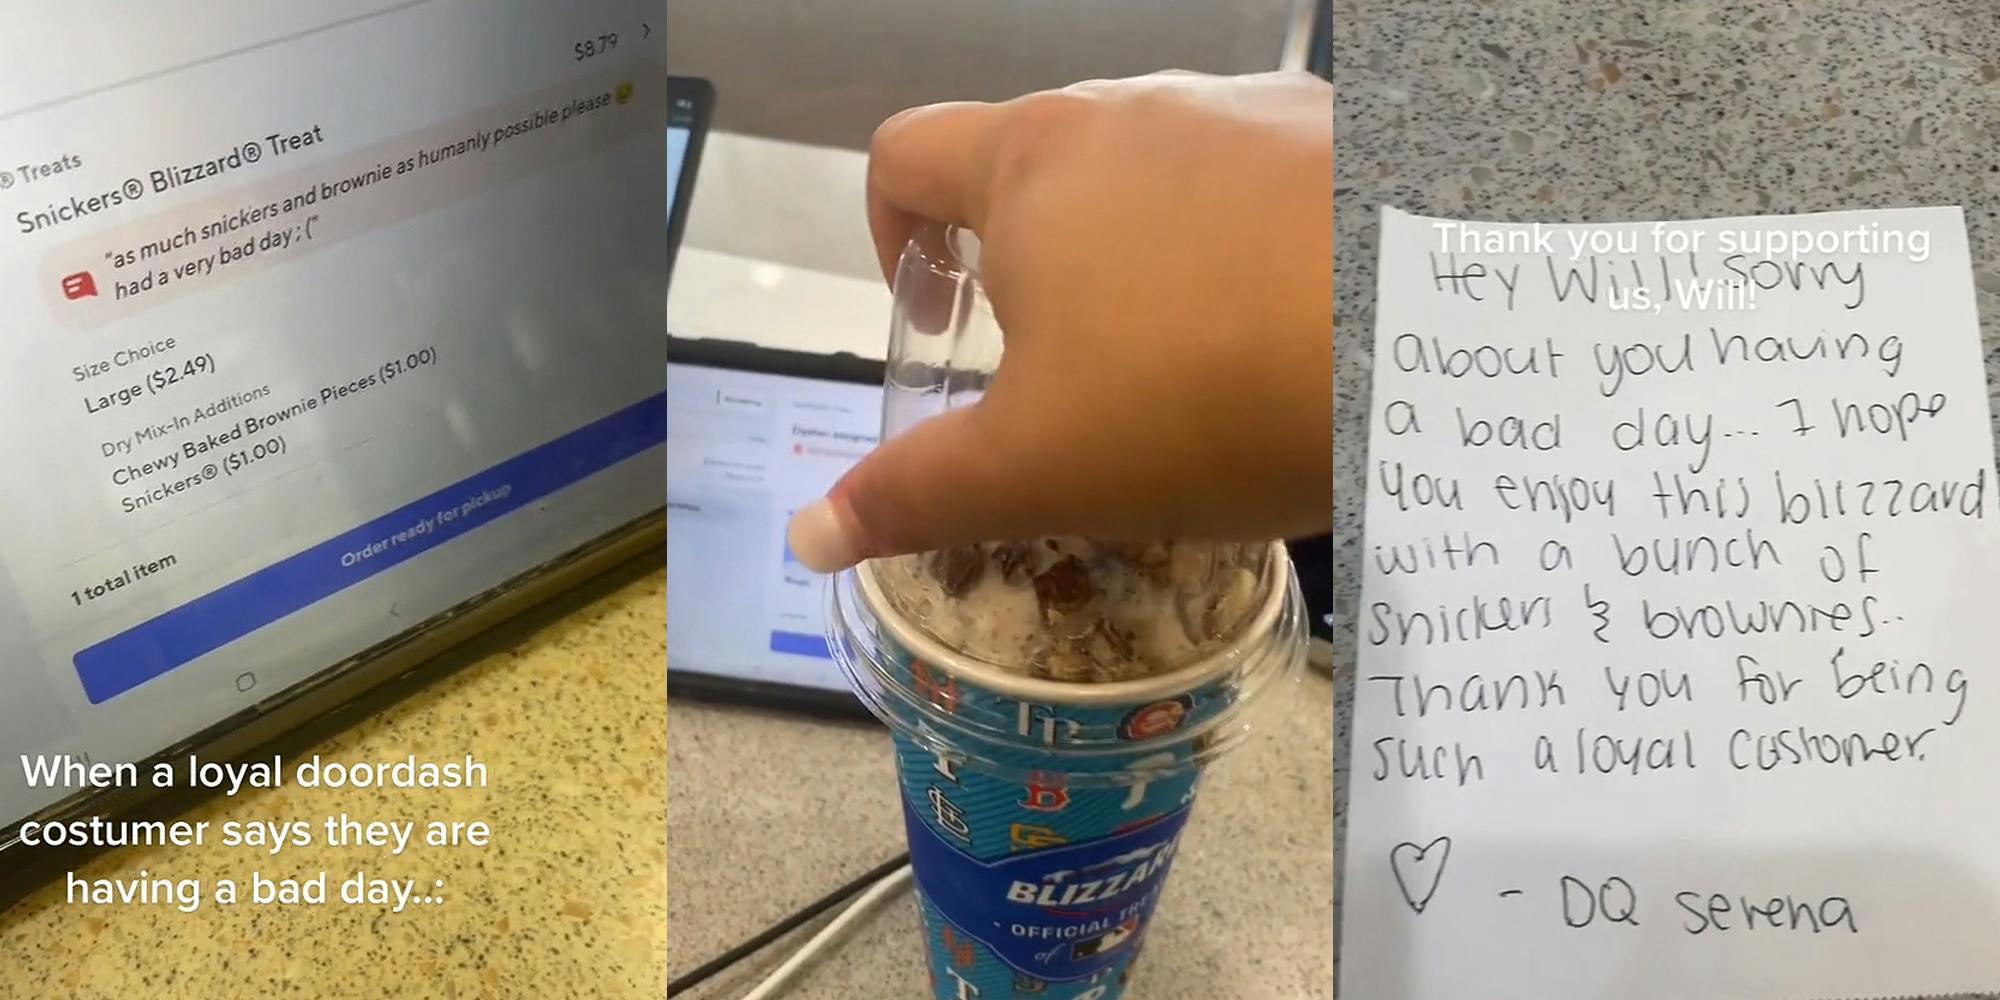 DoorDash order on screen "Snickers Blizzard Treat "as much snickers and brownie as humanly possible please had a very bad day" caption "When loyal doordash customer says they are having a bad day" (l) woman hand putting clear top on brownie and Snickers Blizzard (c) Note for DoorDash customer on table "Hey Will! Sorry about you having a bad day... I hope you enjoy this blizzard snickers & brownies... Thank you for being such a loyal customer -DQ Serena" caption "Thank you for supporting us, Will!" (r)